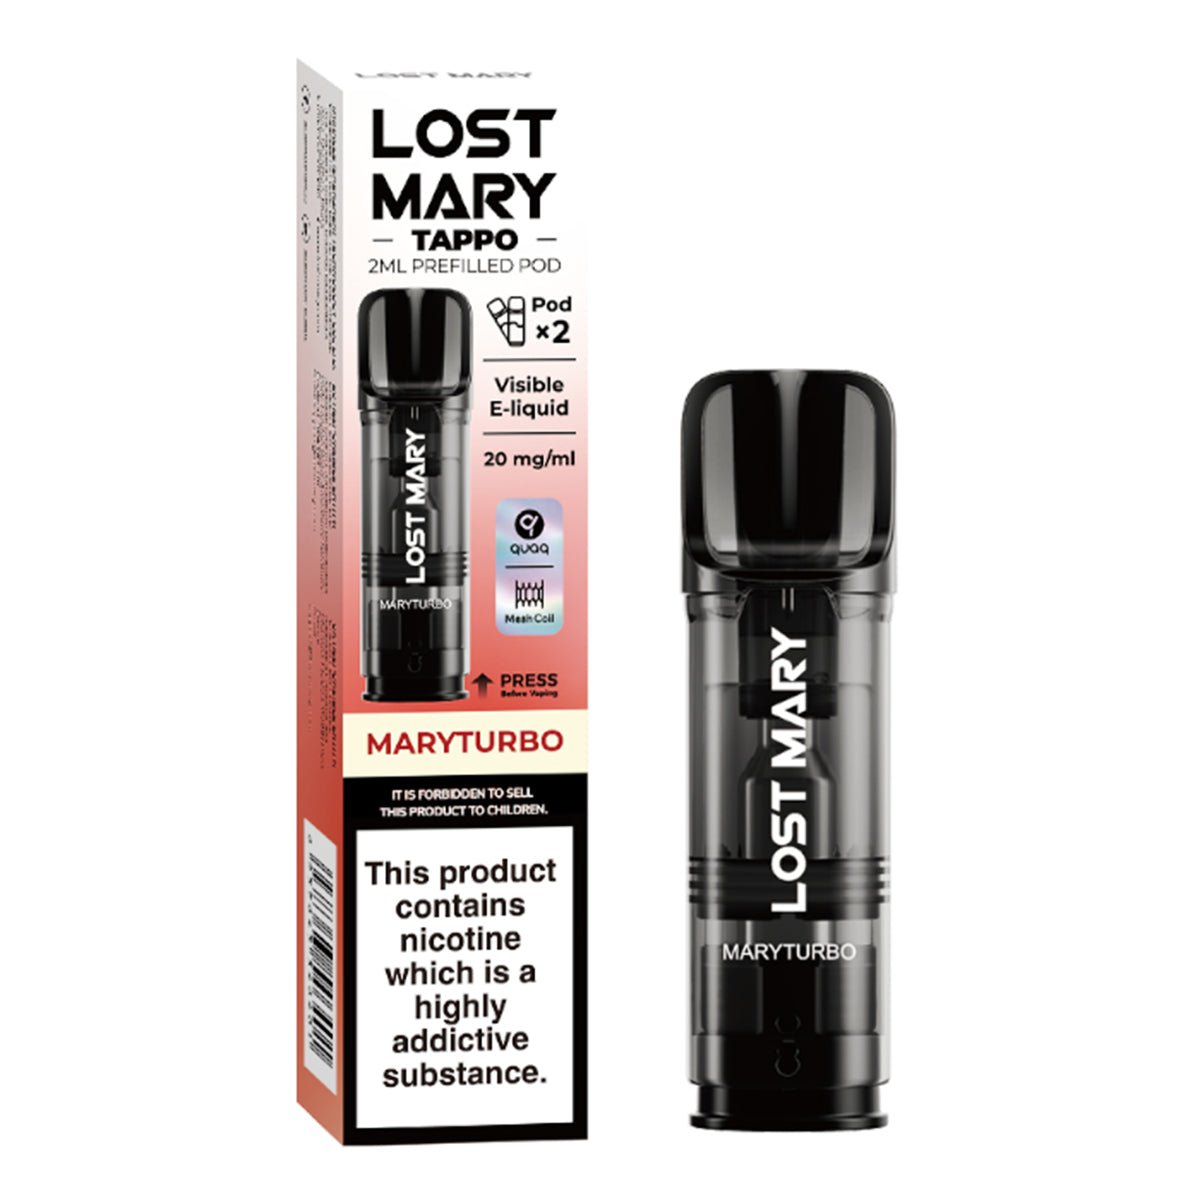 Mary Turbo Tappo Pre-filled Pod by Lost Mary - Prime Vapes UK